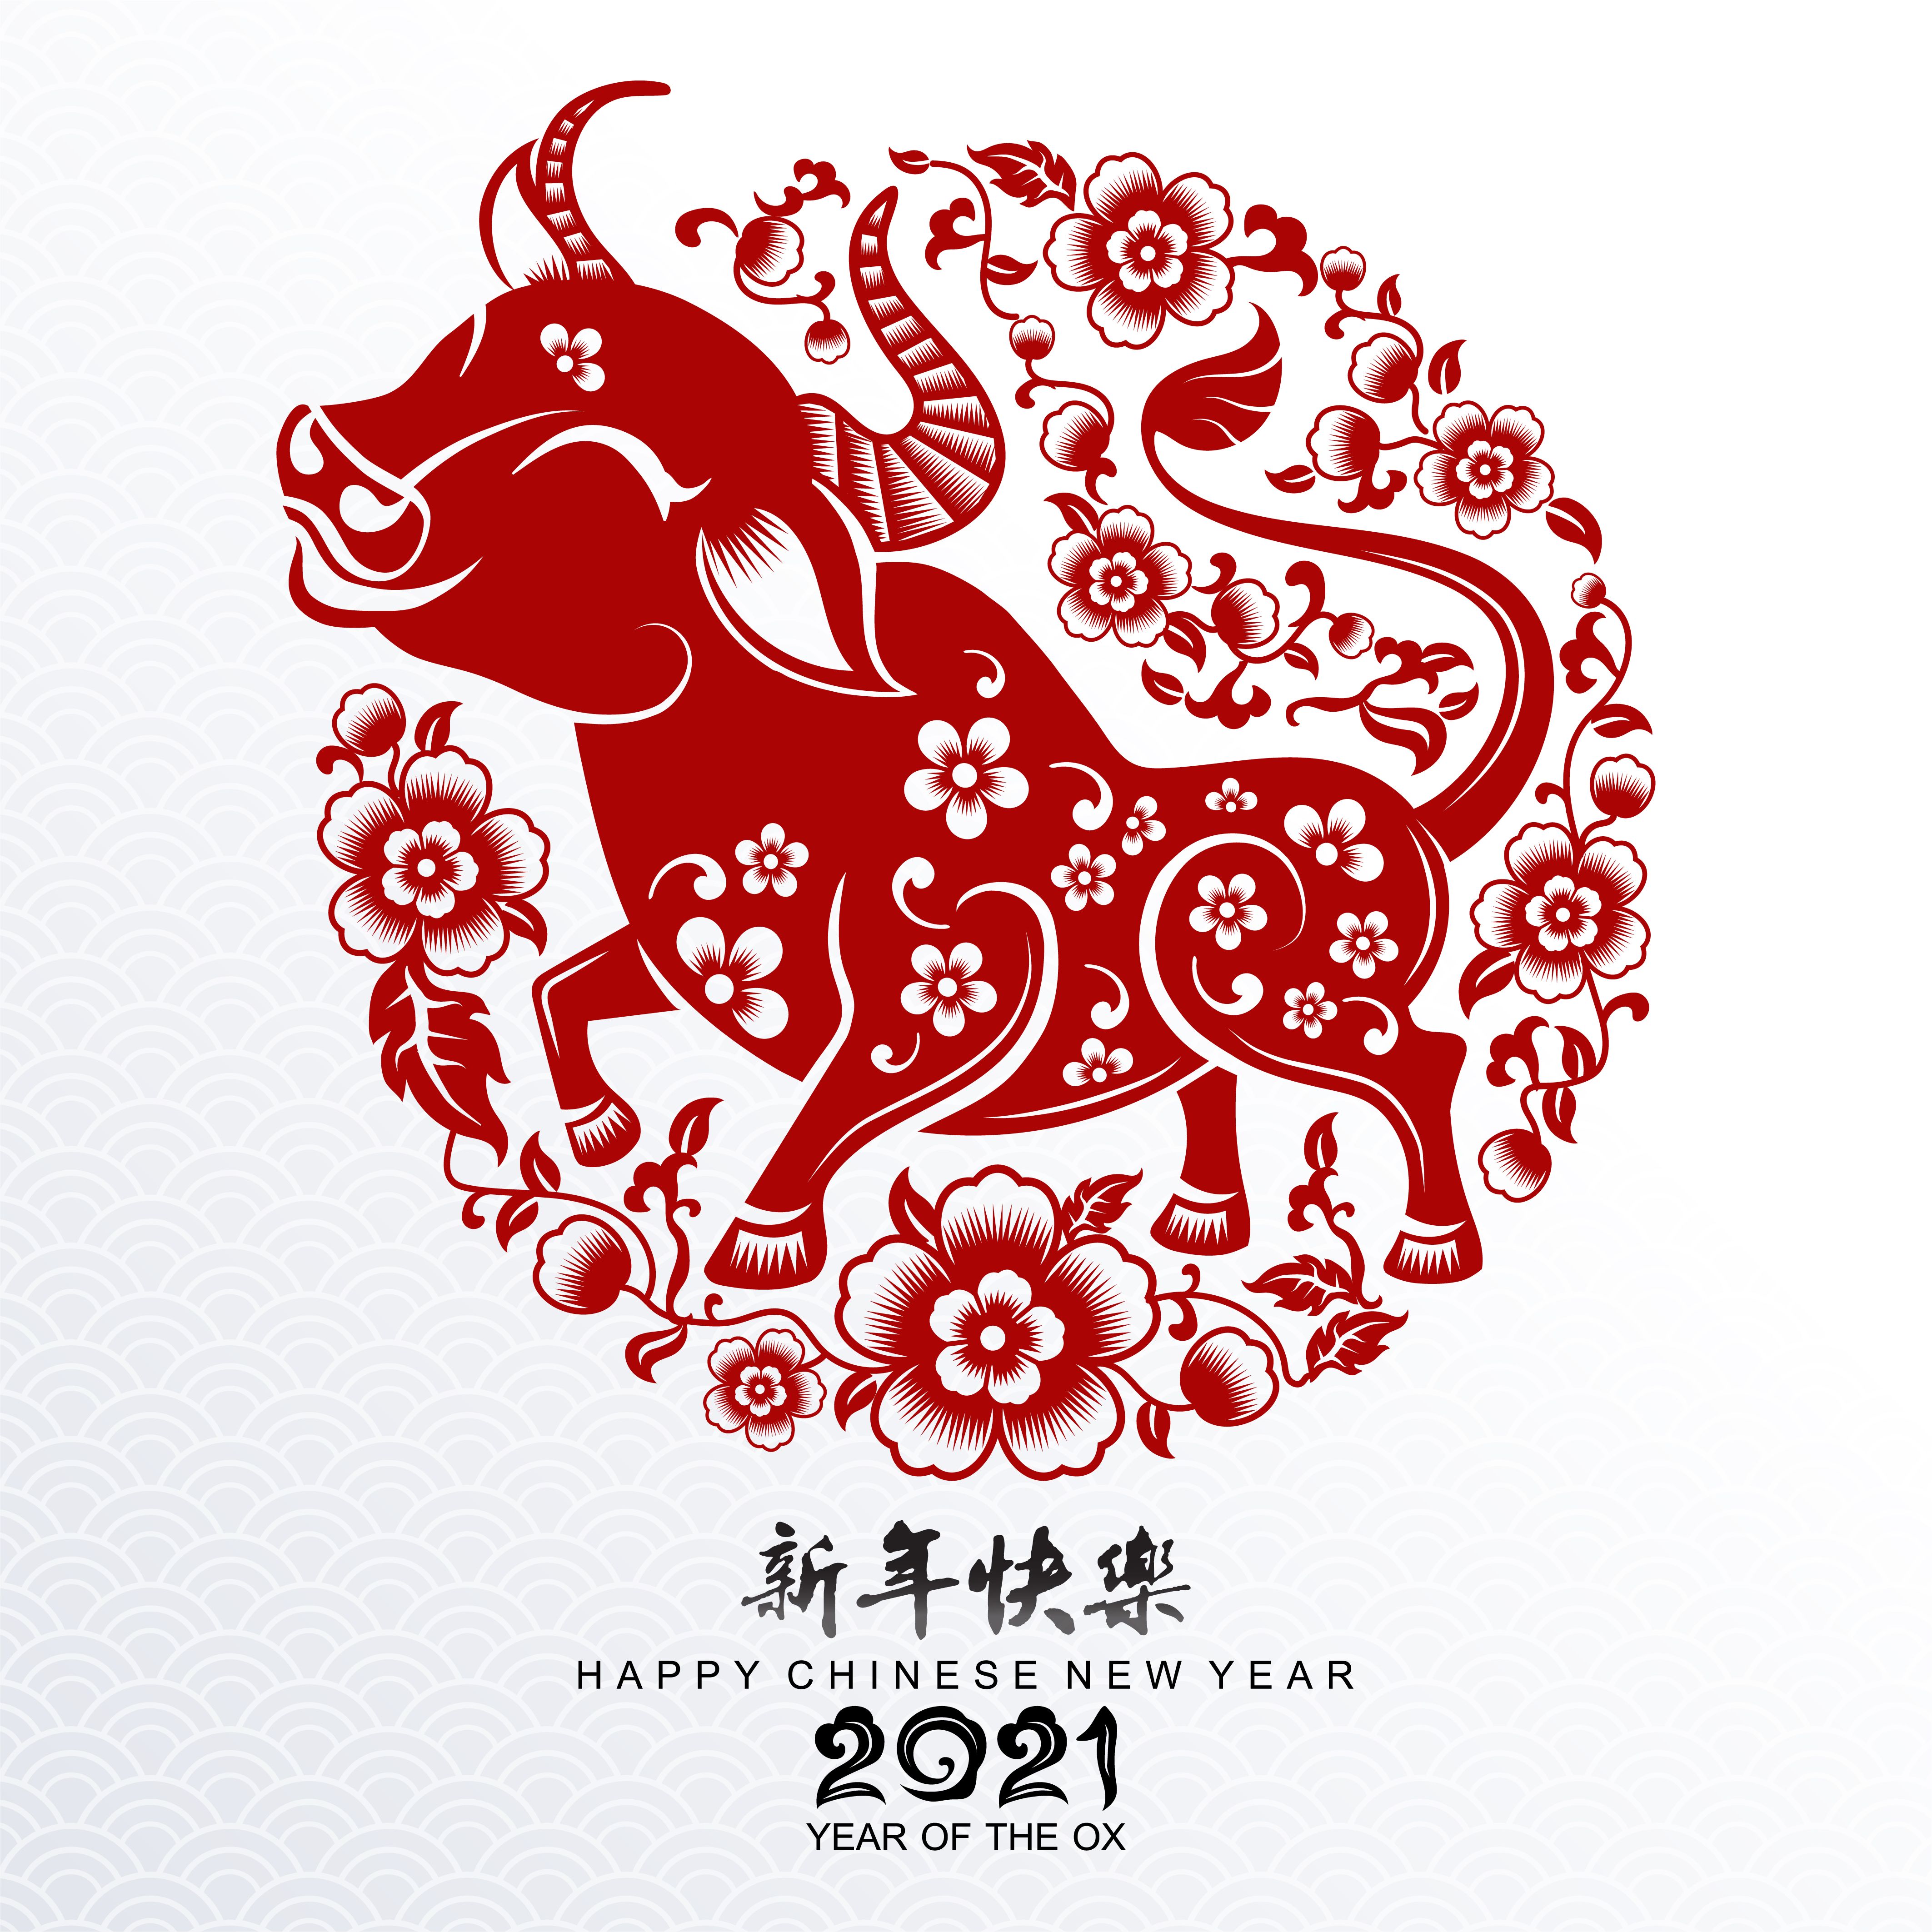 Chinese new year 2021 floral frame with ox Free Vectors, Clipart Graphics & Vector Art